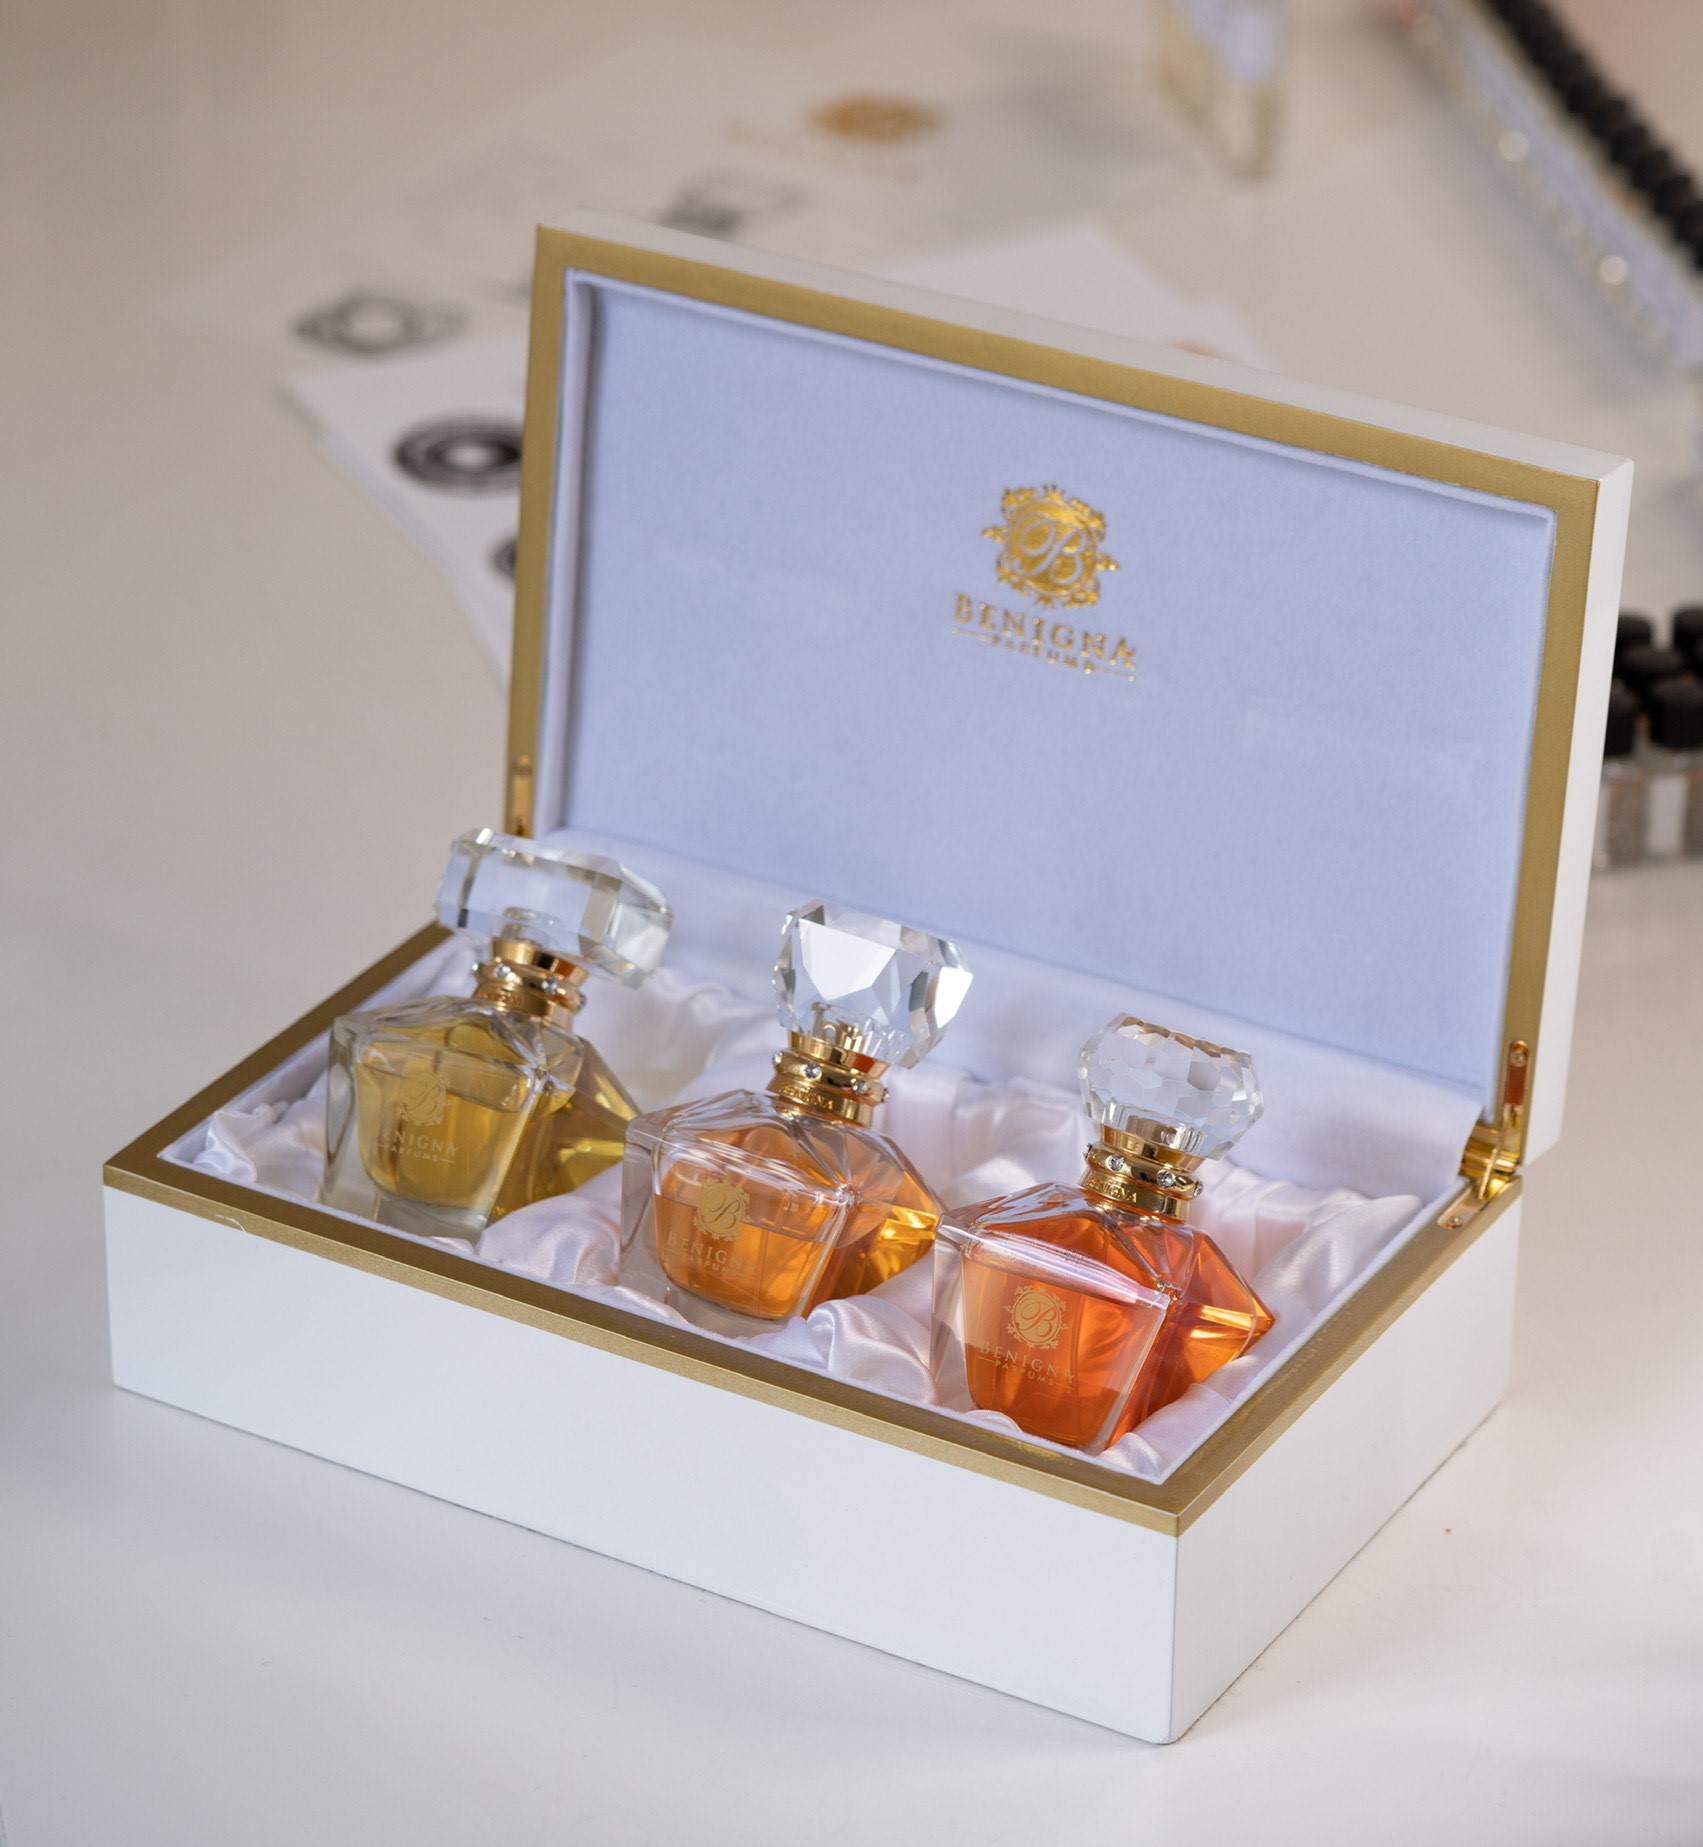 Benigna Parfums releases Trio of Joyful Fragrances as part of a New Luxury  Niche Fragrance Brand. A brand that focuses on gender-neutral and  transformative scents.